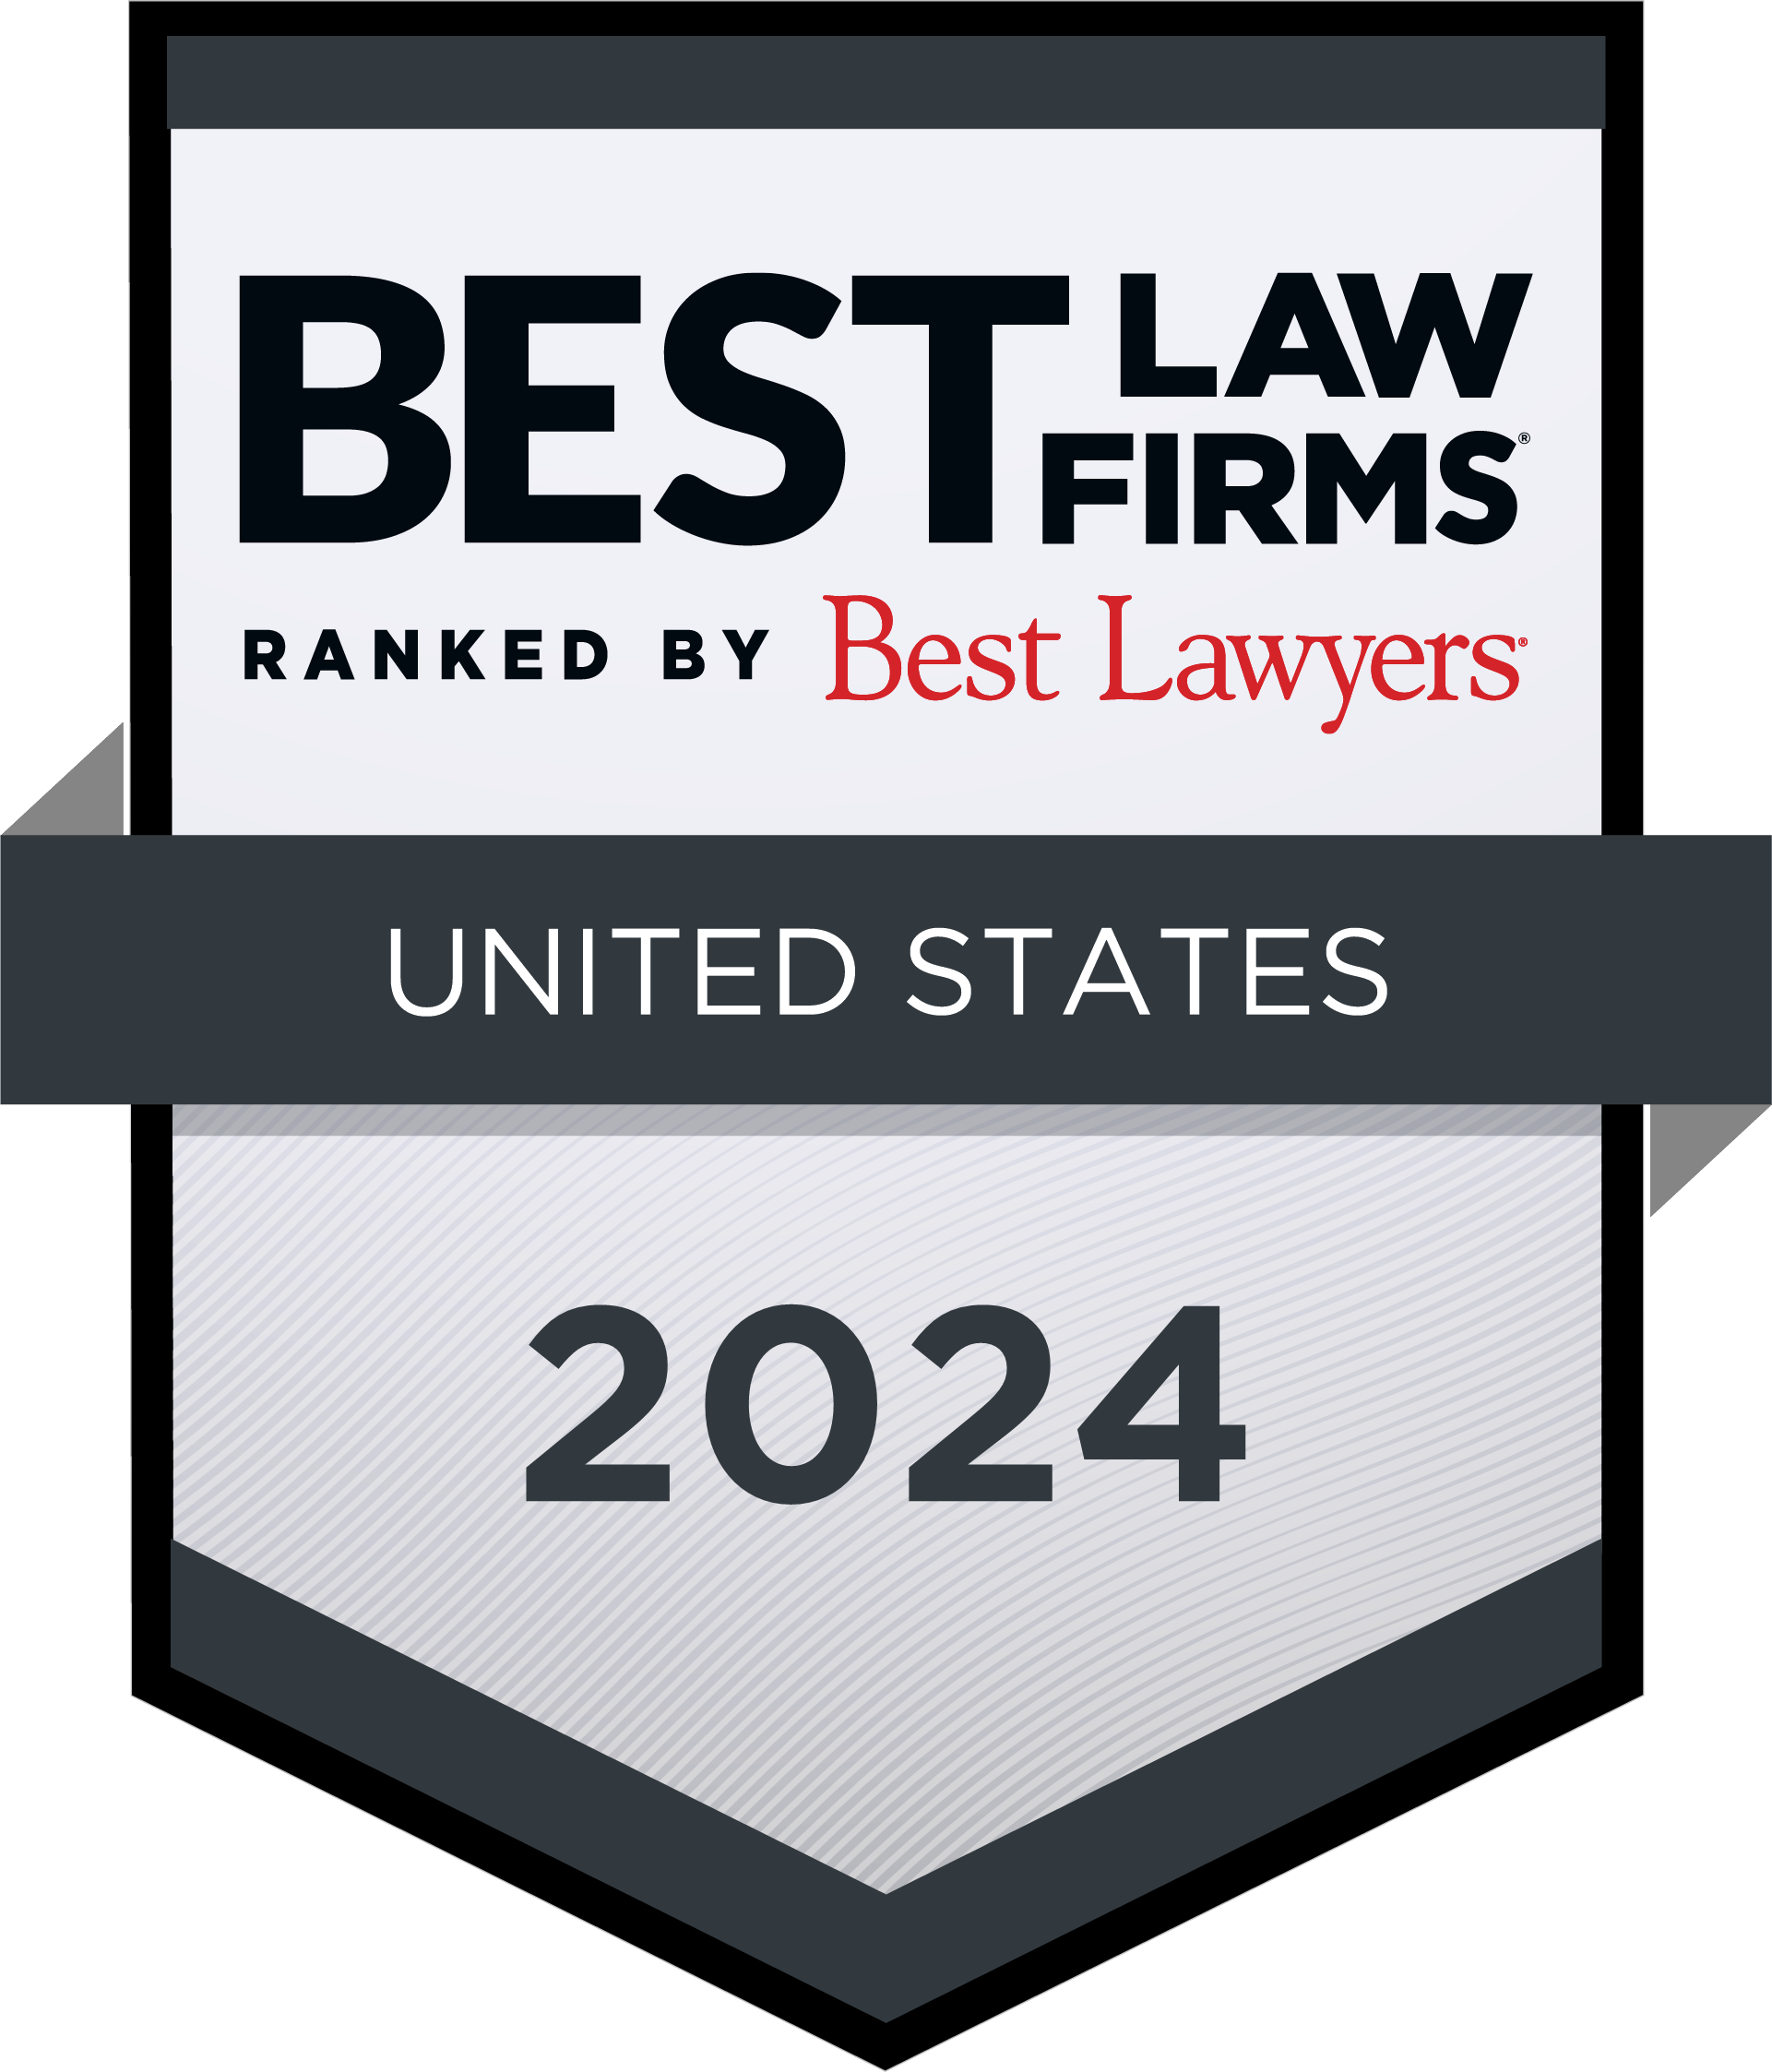 Best Law Firm 2020